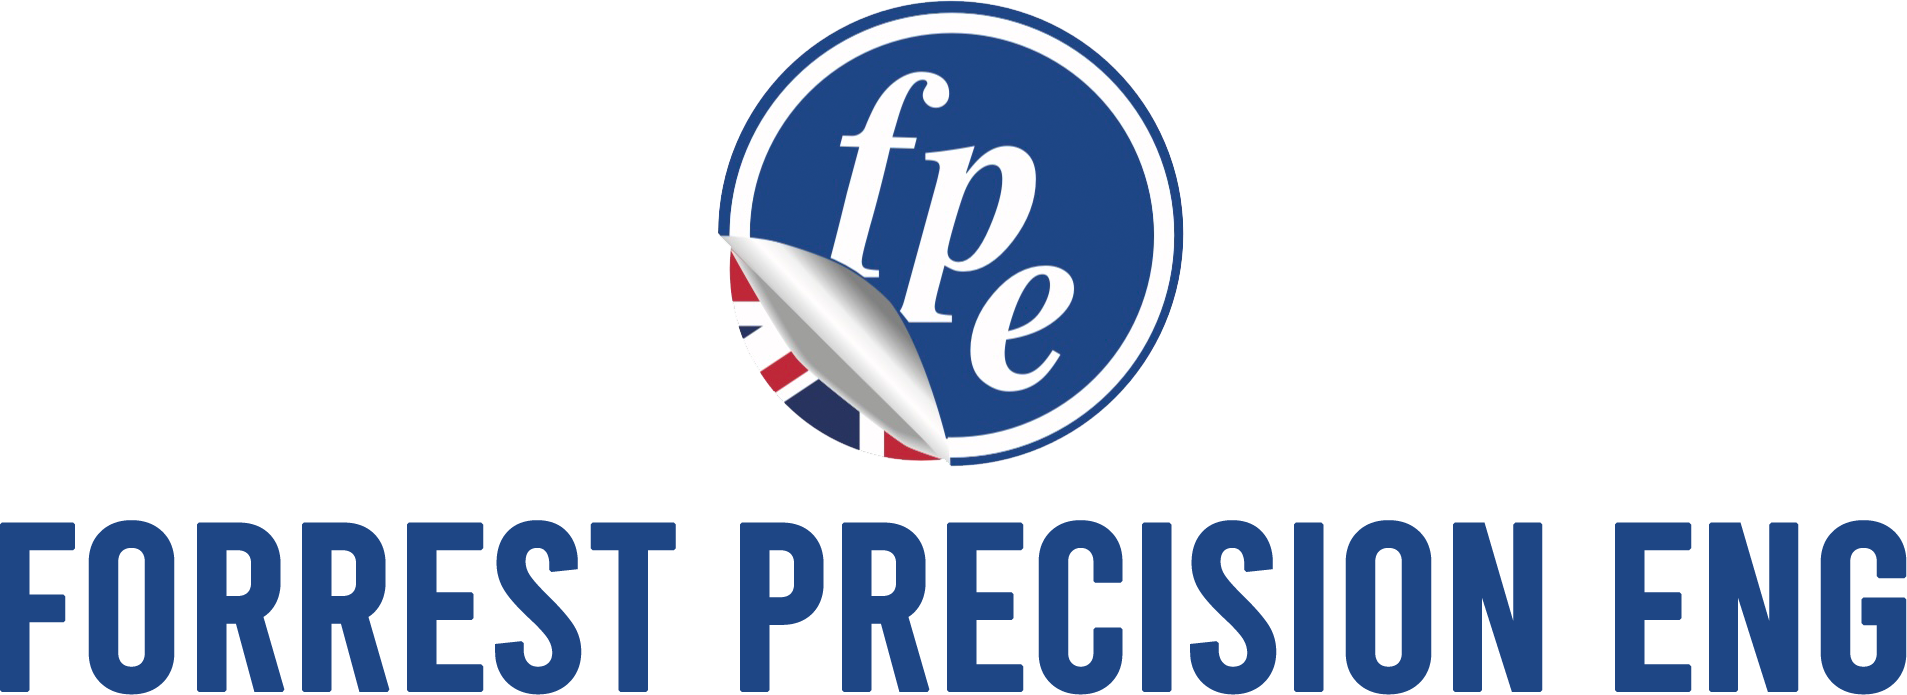 Forrest Precision Engineering